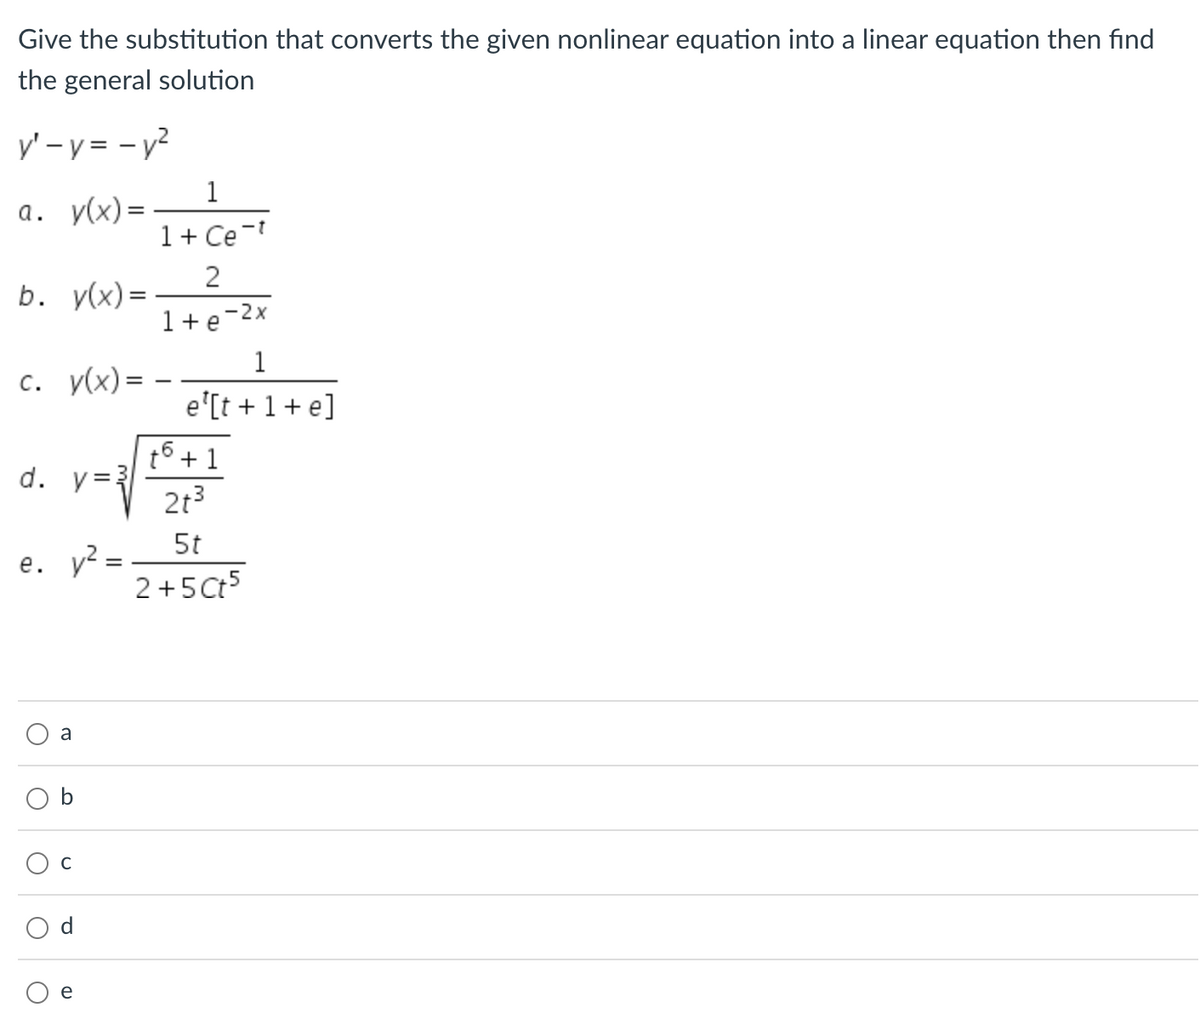 Give the substitution that converts the given nonlinear equation into a linear equation then find
the general solution
y'-y=-y²
a. y(x) =
b. y(x)=
d. y=3
e. y² =
c. y(x) = -
O
a
1
1+ Ce=t
e
2
1+e-2x
1
e'[t+1+e]
t6 + 1
2t3
5t
2+5Ct5